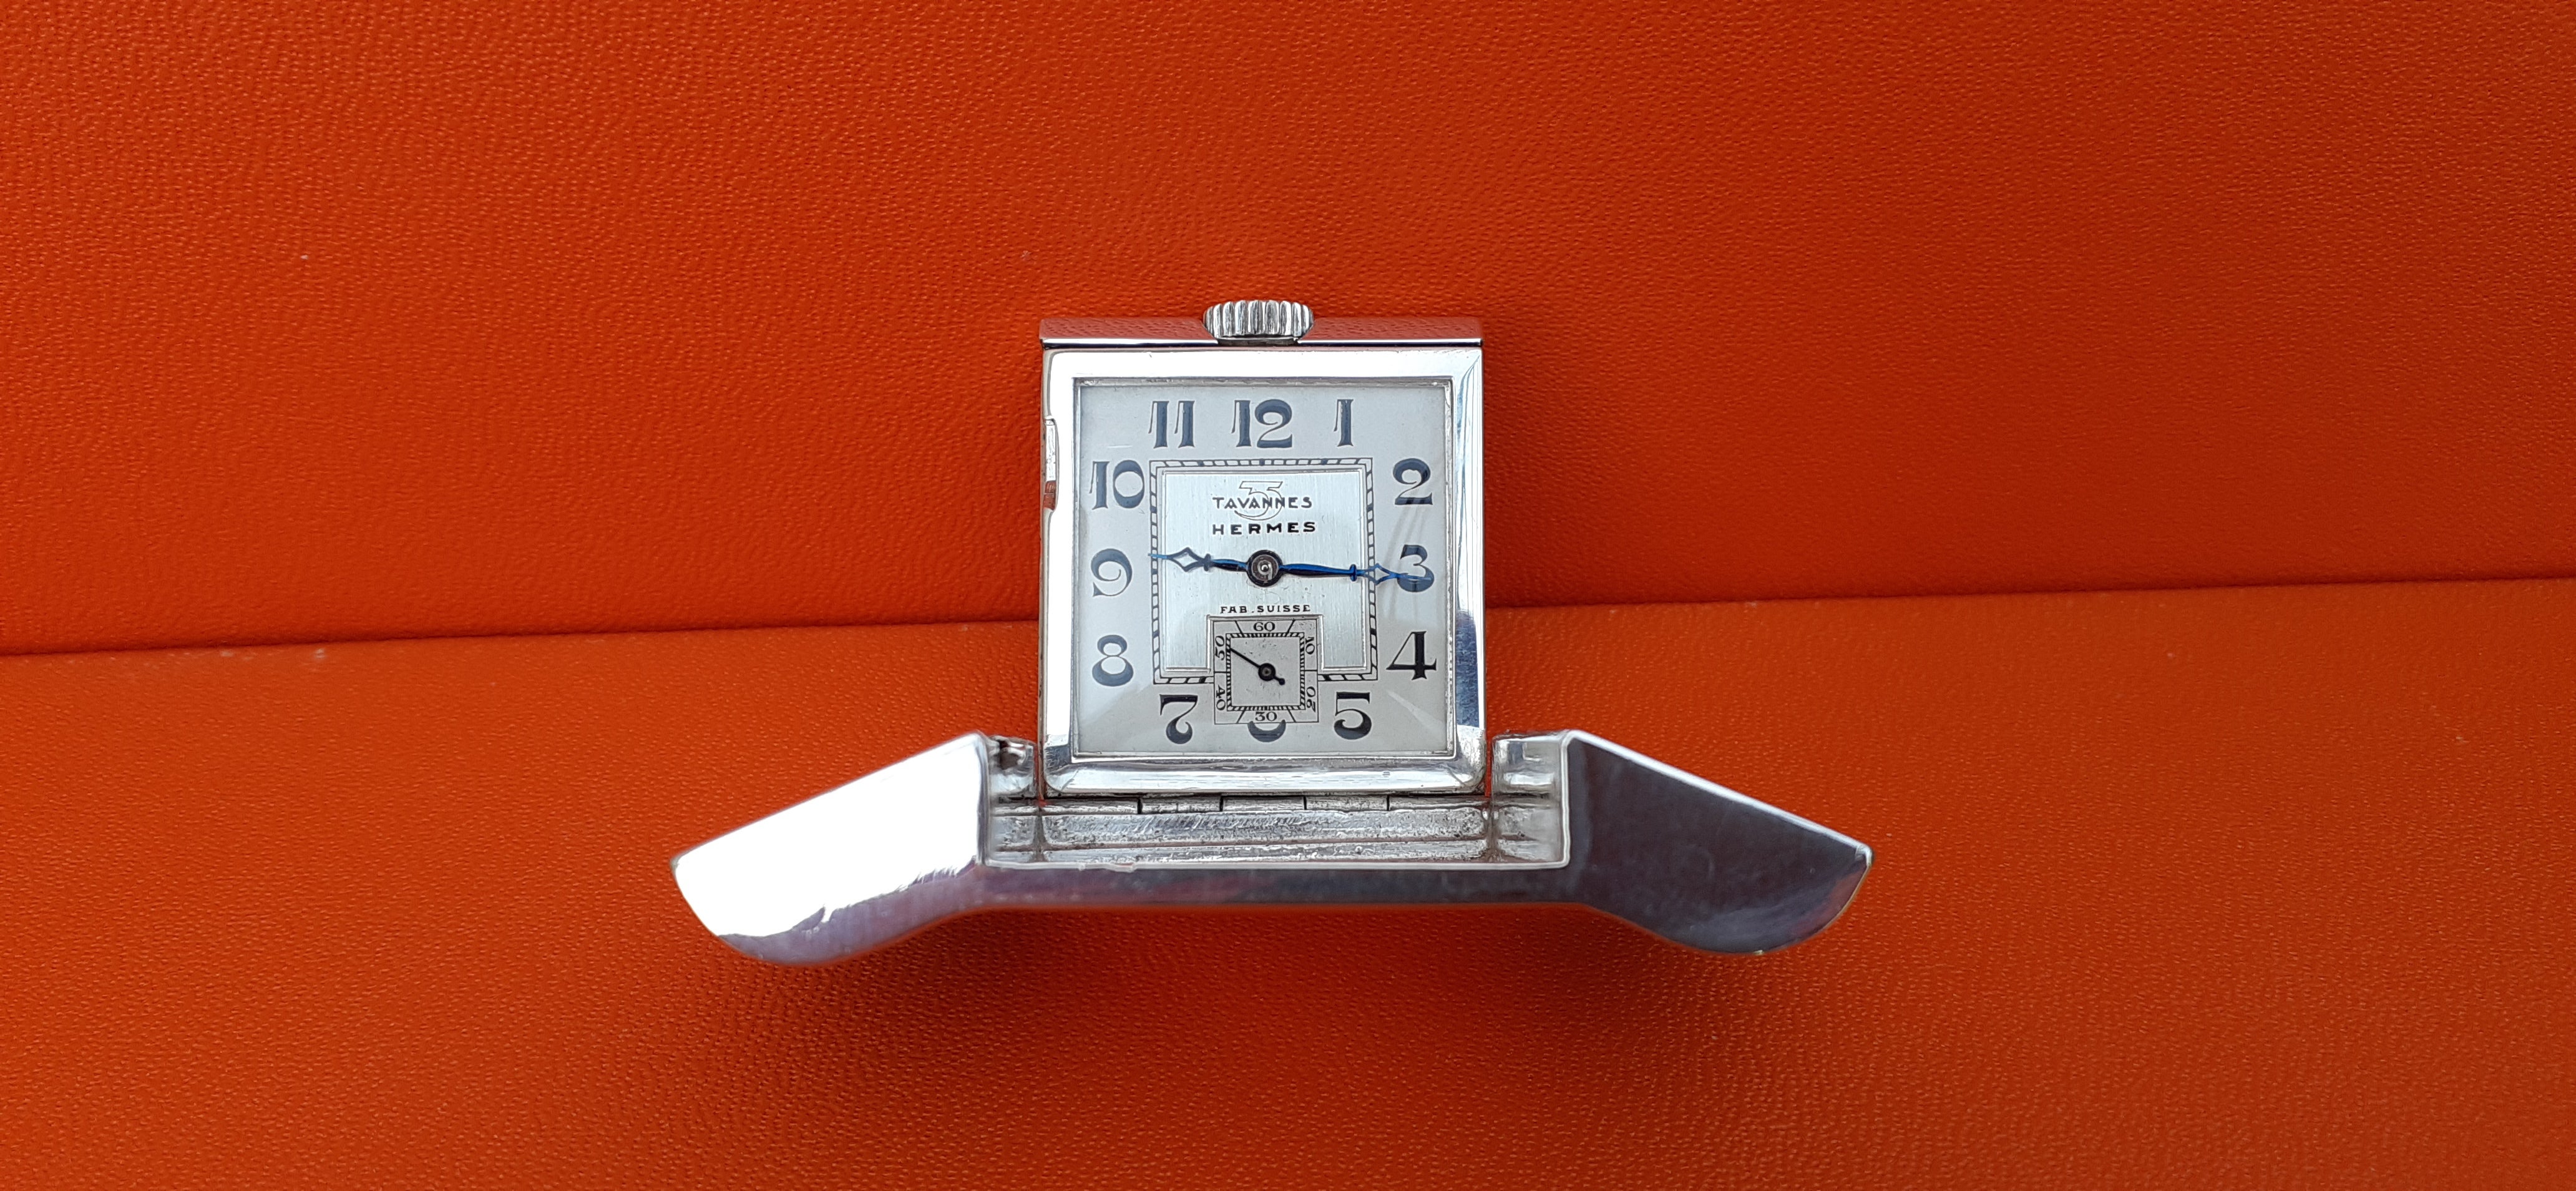 This is a rare opportunity to get an authentic Tavannes Golf Watch

Made for Hermès

IN WORKING CONDITION

Unusual, fine, this is a true gem for Golf Lovers

Created for golfers, designed to be worn on a belt

Made in Switzerland in the